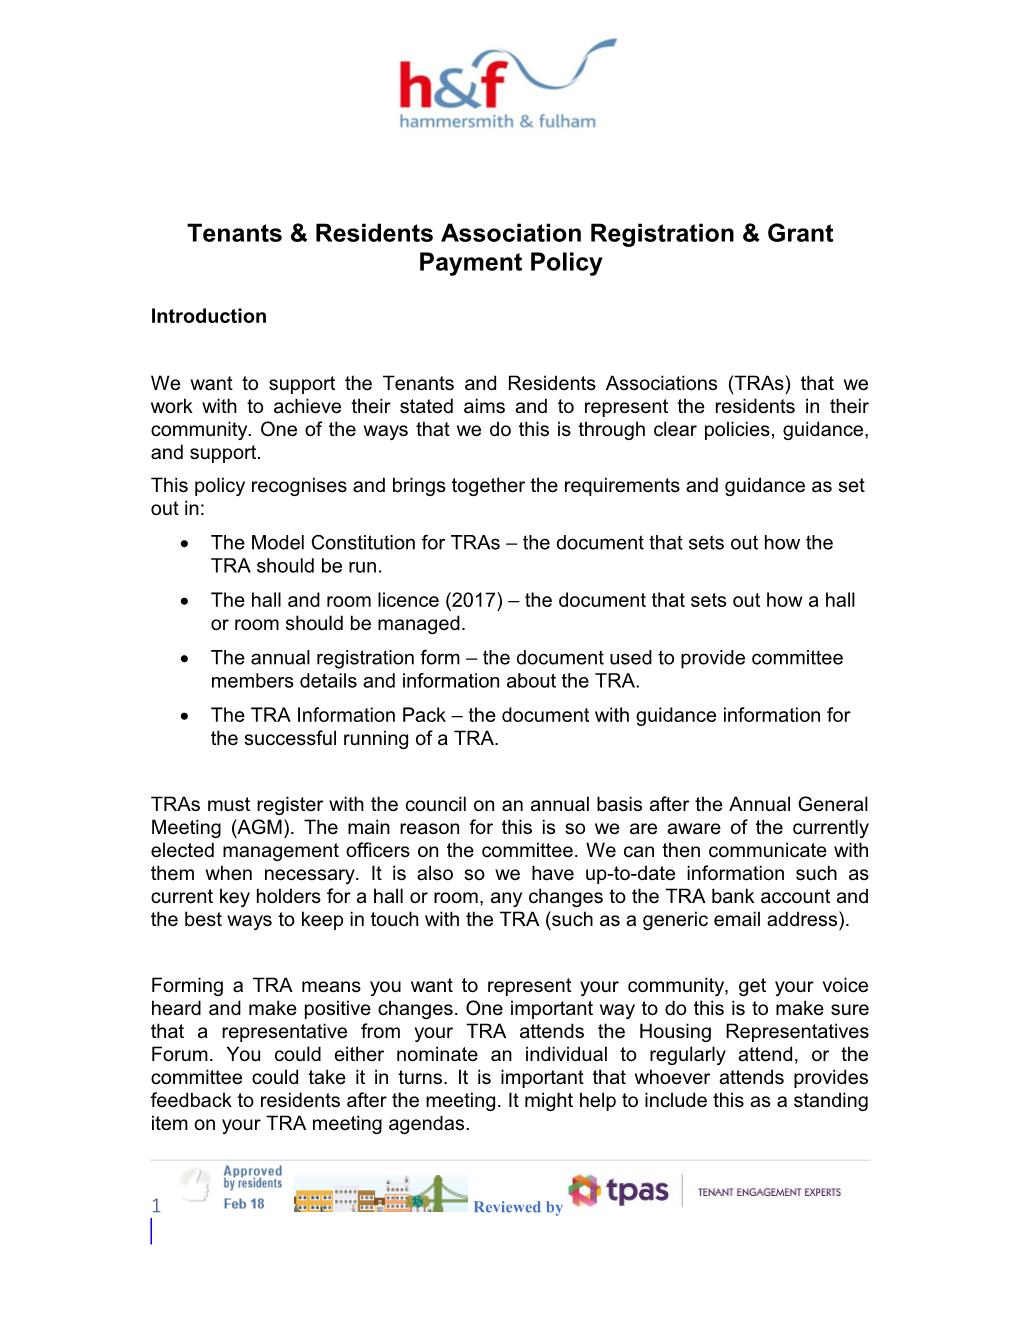 The Payment of Tenants & Residents Associations